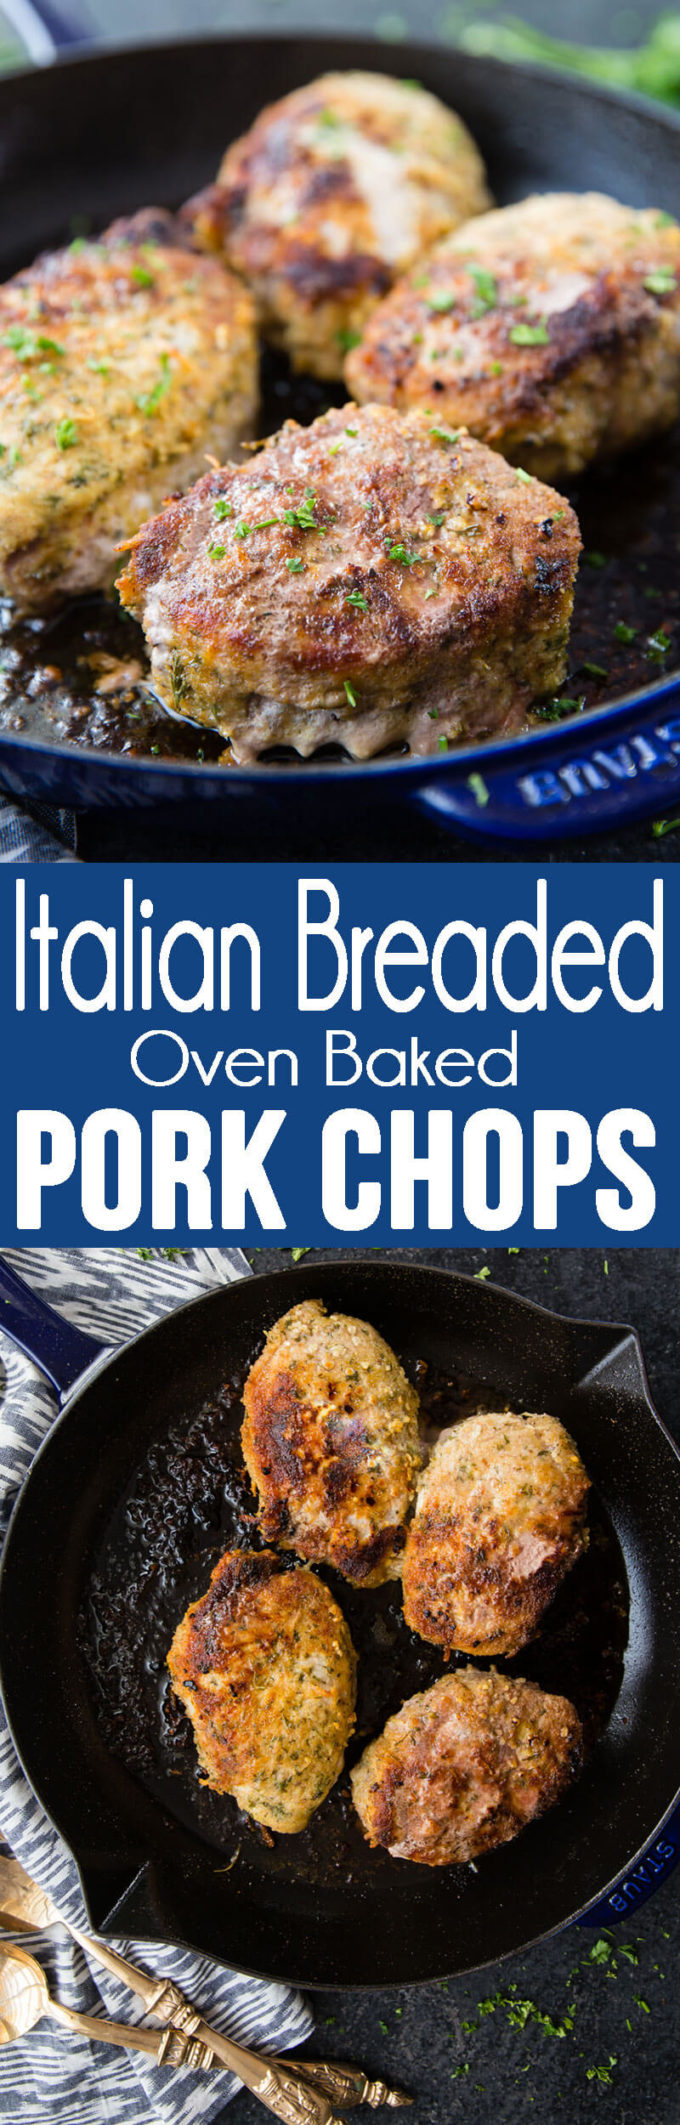 Oven baked pork chops that are breaded in Italian breadcrumbs and parmesan